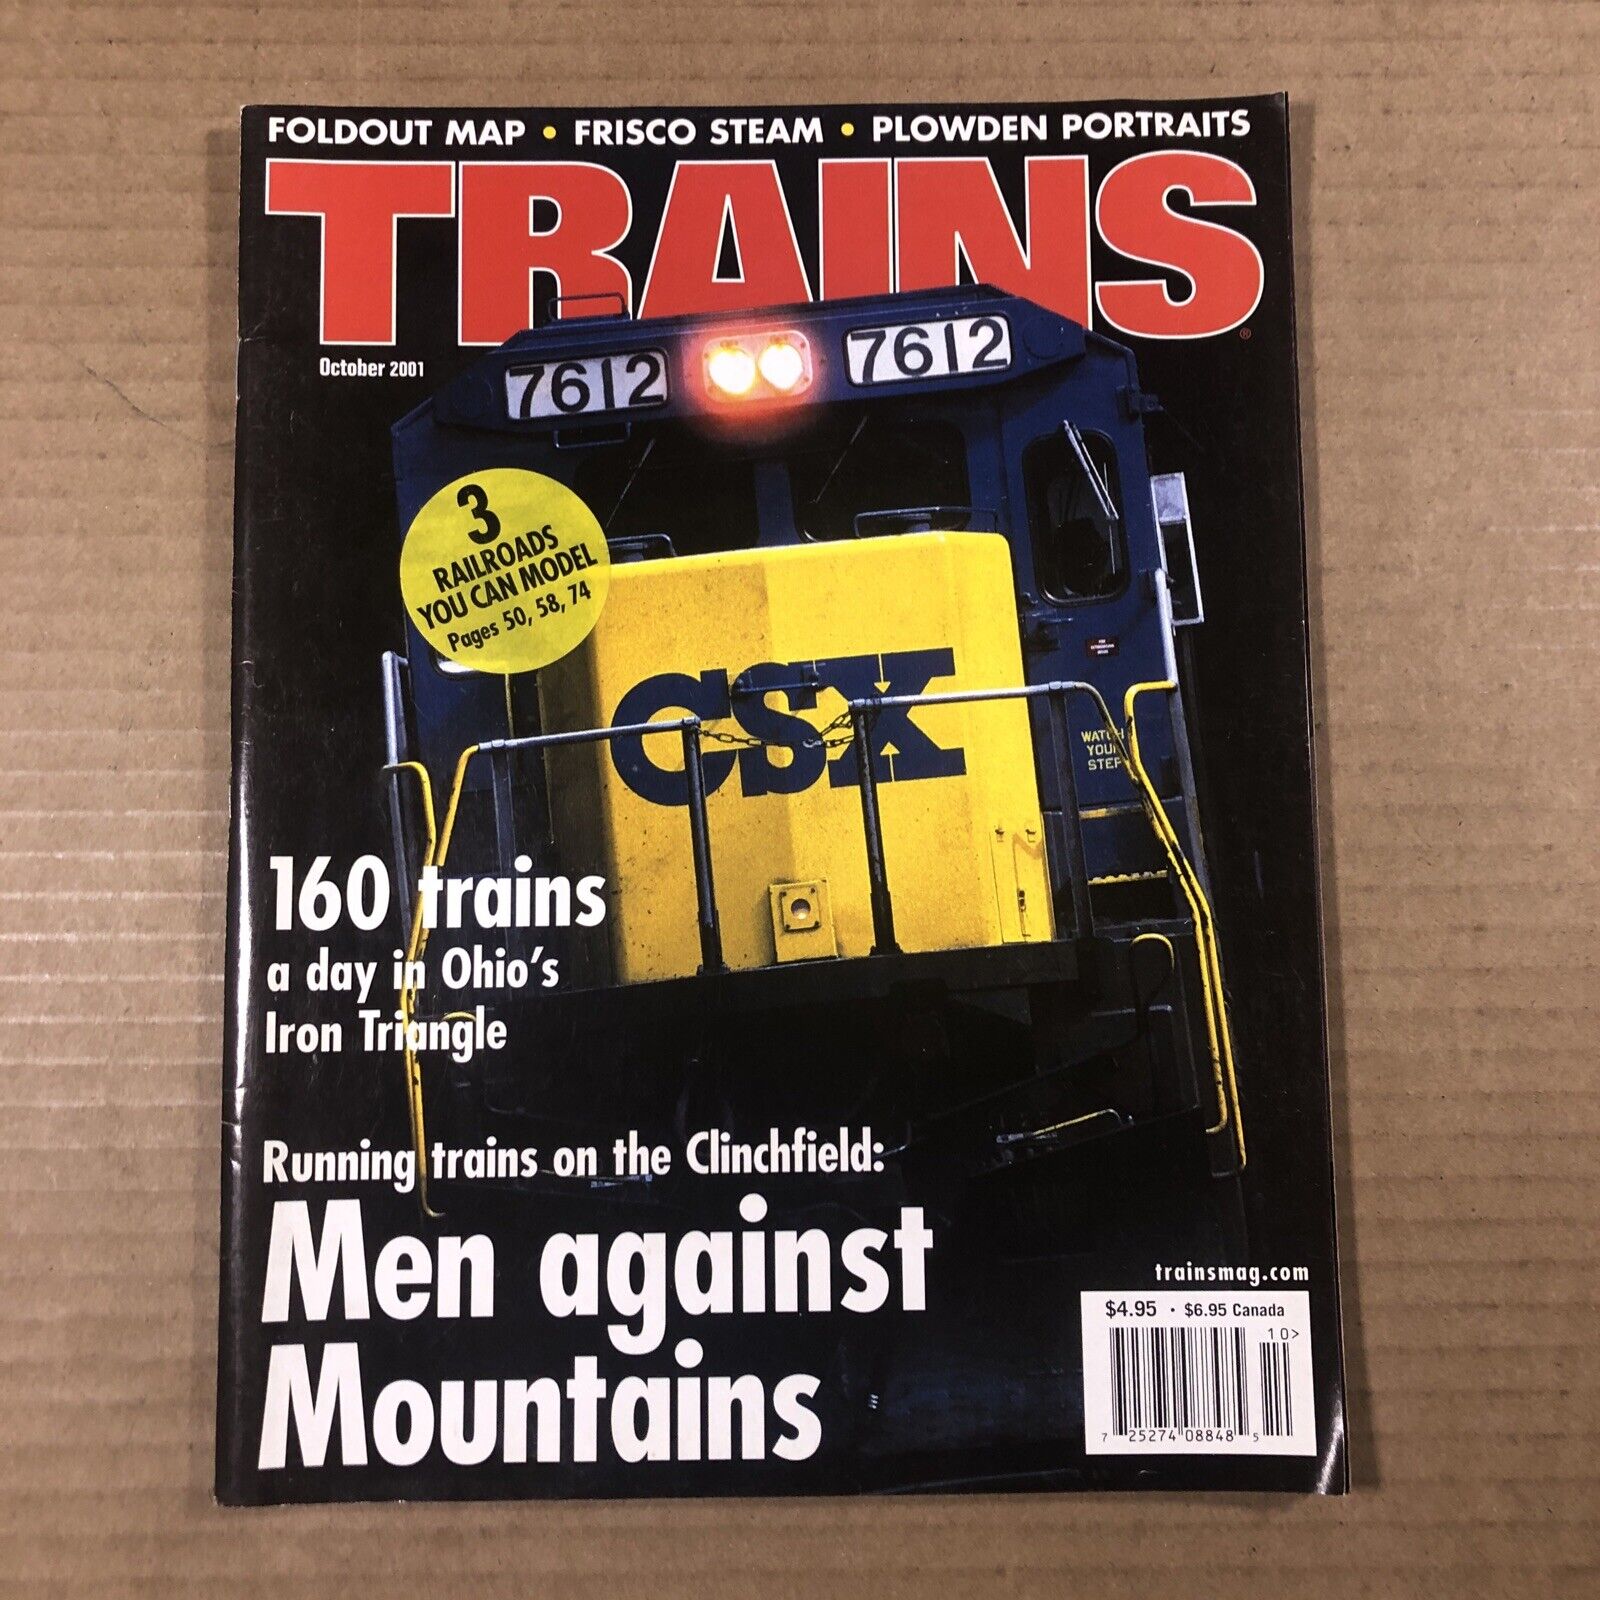 Trains Magazine 2001 October Running trains on the Clinchfield 160 trains a day